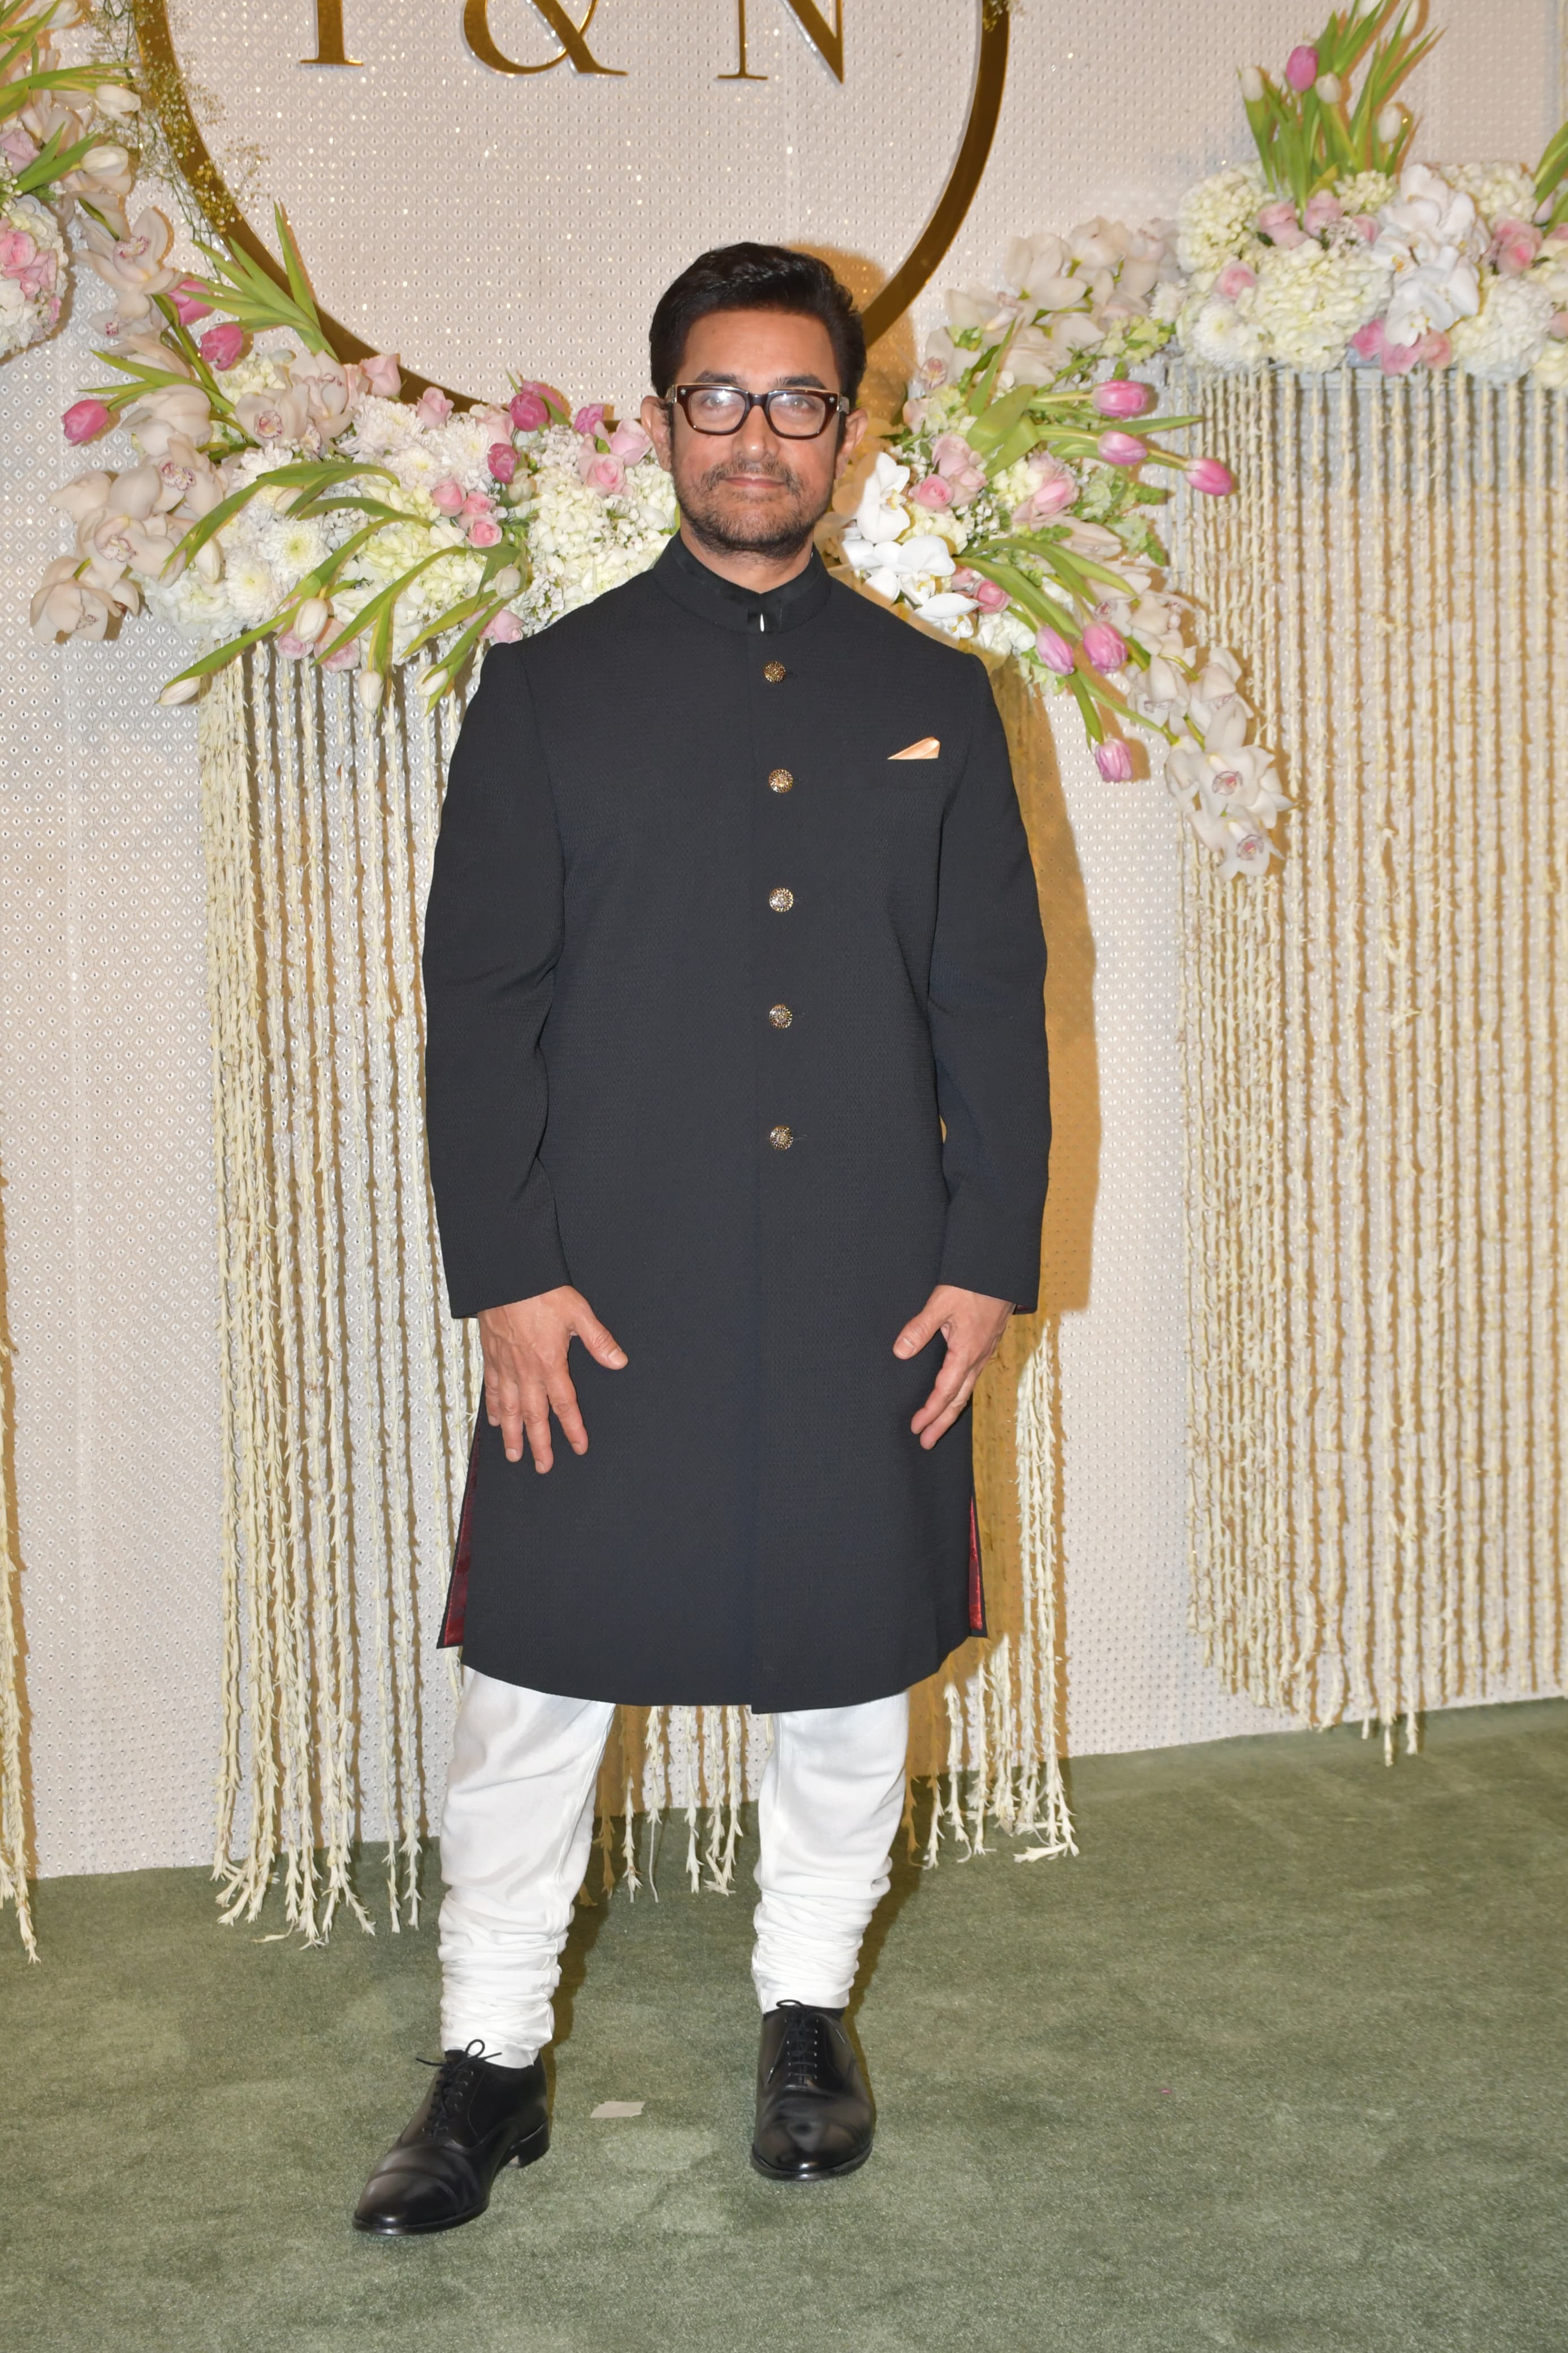 Proud father Aamir Khan, adorned in a black nawabi outfit, radiates pure joy. Oh my, he looks so happy!